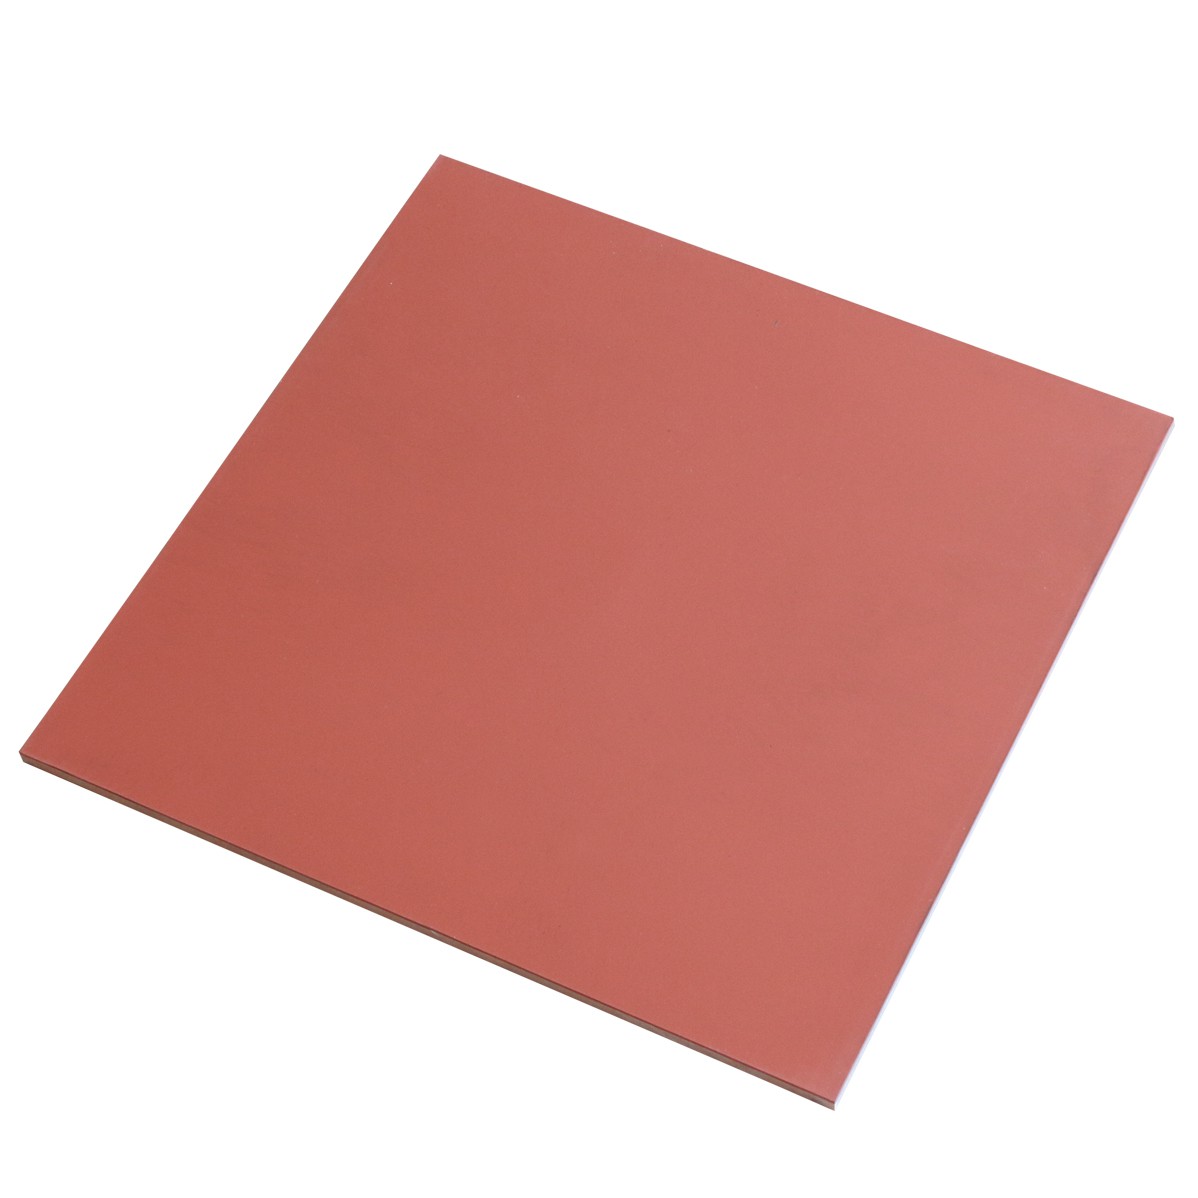 SILICON PLATES - 150 mm x 305 mm 